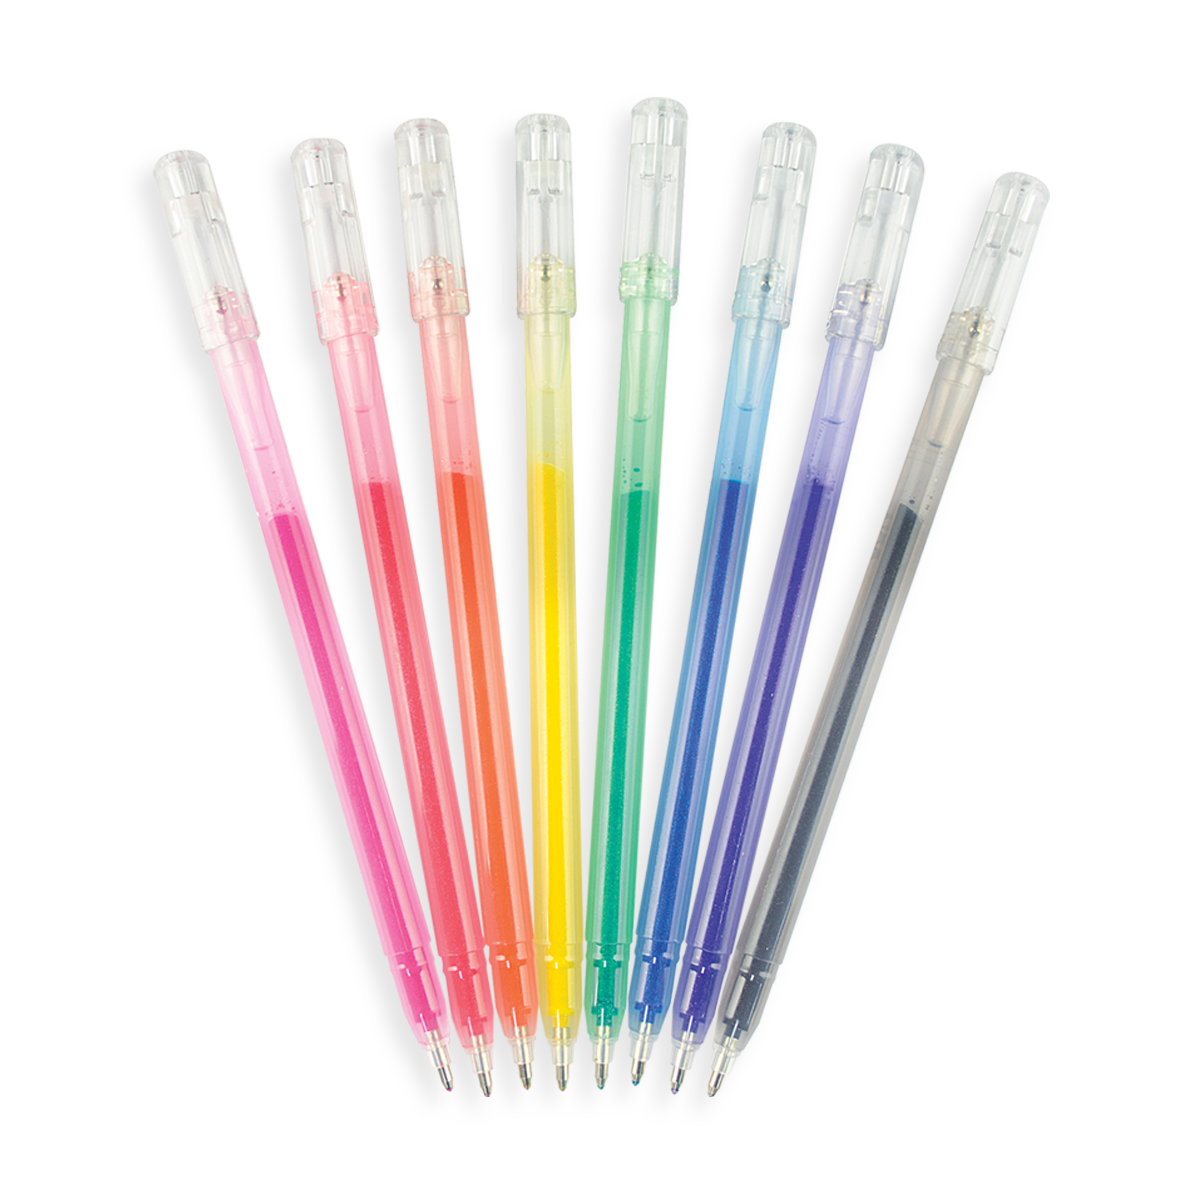  Ooly Rainbow Sparkle Glitter Markers [Set of 15], Includes 5  Pastel Markers and 10 Clasic Color Markers, Glittery and Sparkling Markers  for Kids, 2mm Nib for Medium Sized Lines [GLITTER